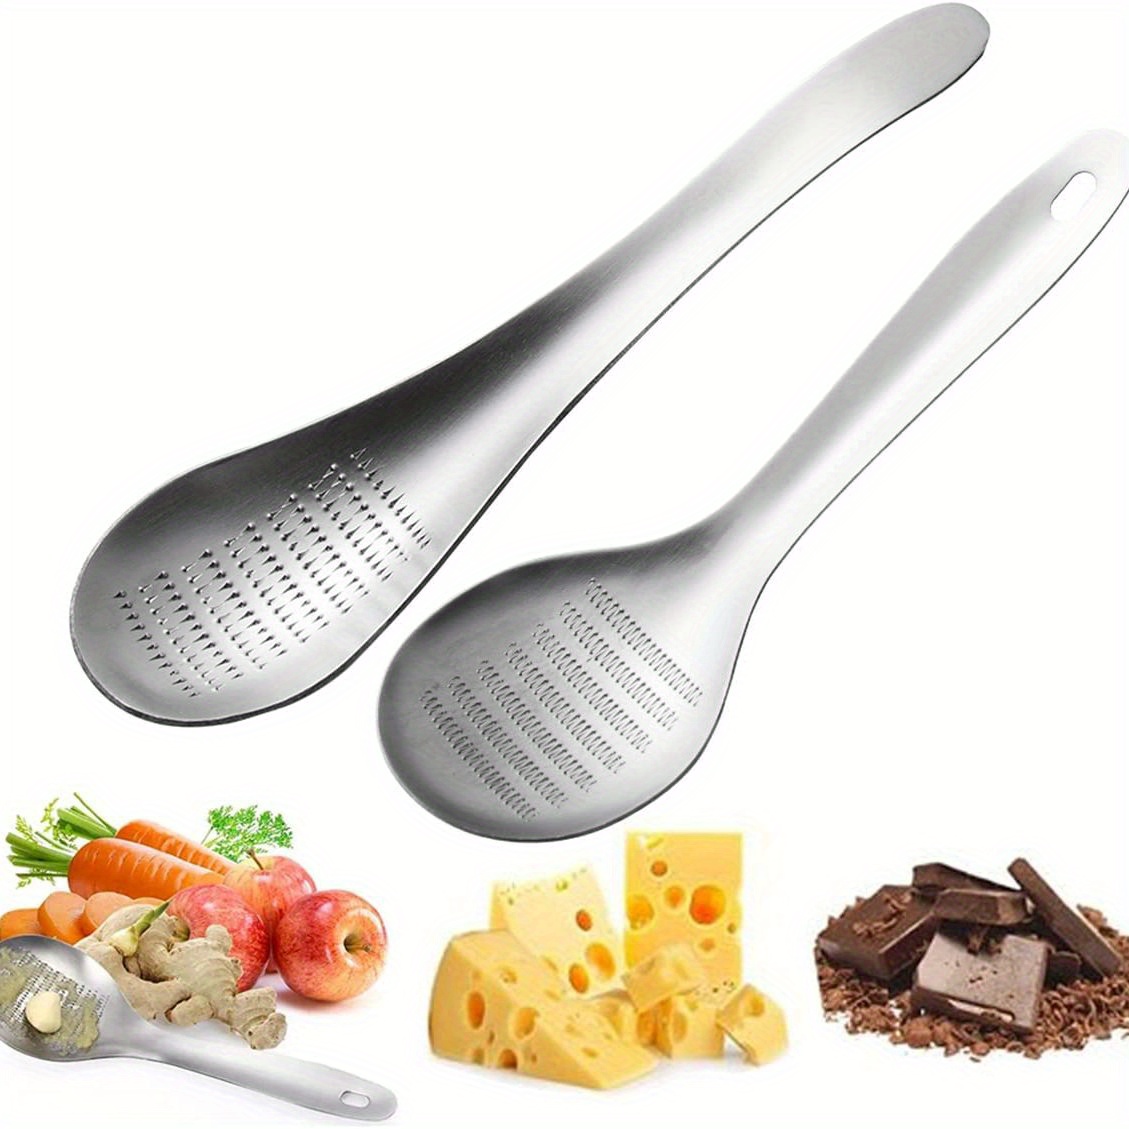 Grater Spoon, Grating Spoon, Stainless Steel Ginger Grater, Ginger Tea Spoon,  Garlic Grater, Garlic Grater Shred Tool, Grinder Zester Spoon For Garlic  Ginger Fruits Root Vegetables, Kitchen Tools, Back To School Supplies 